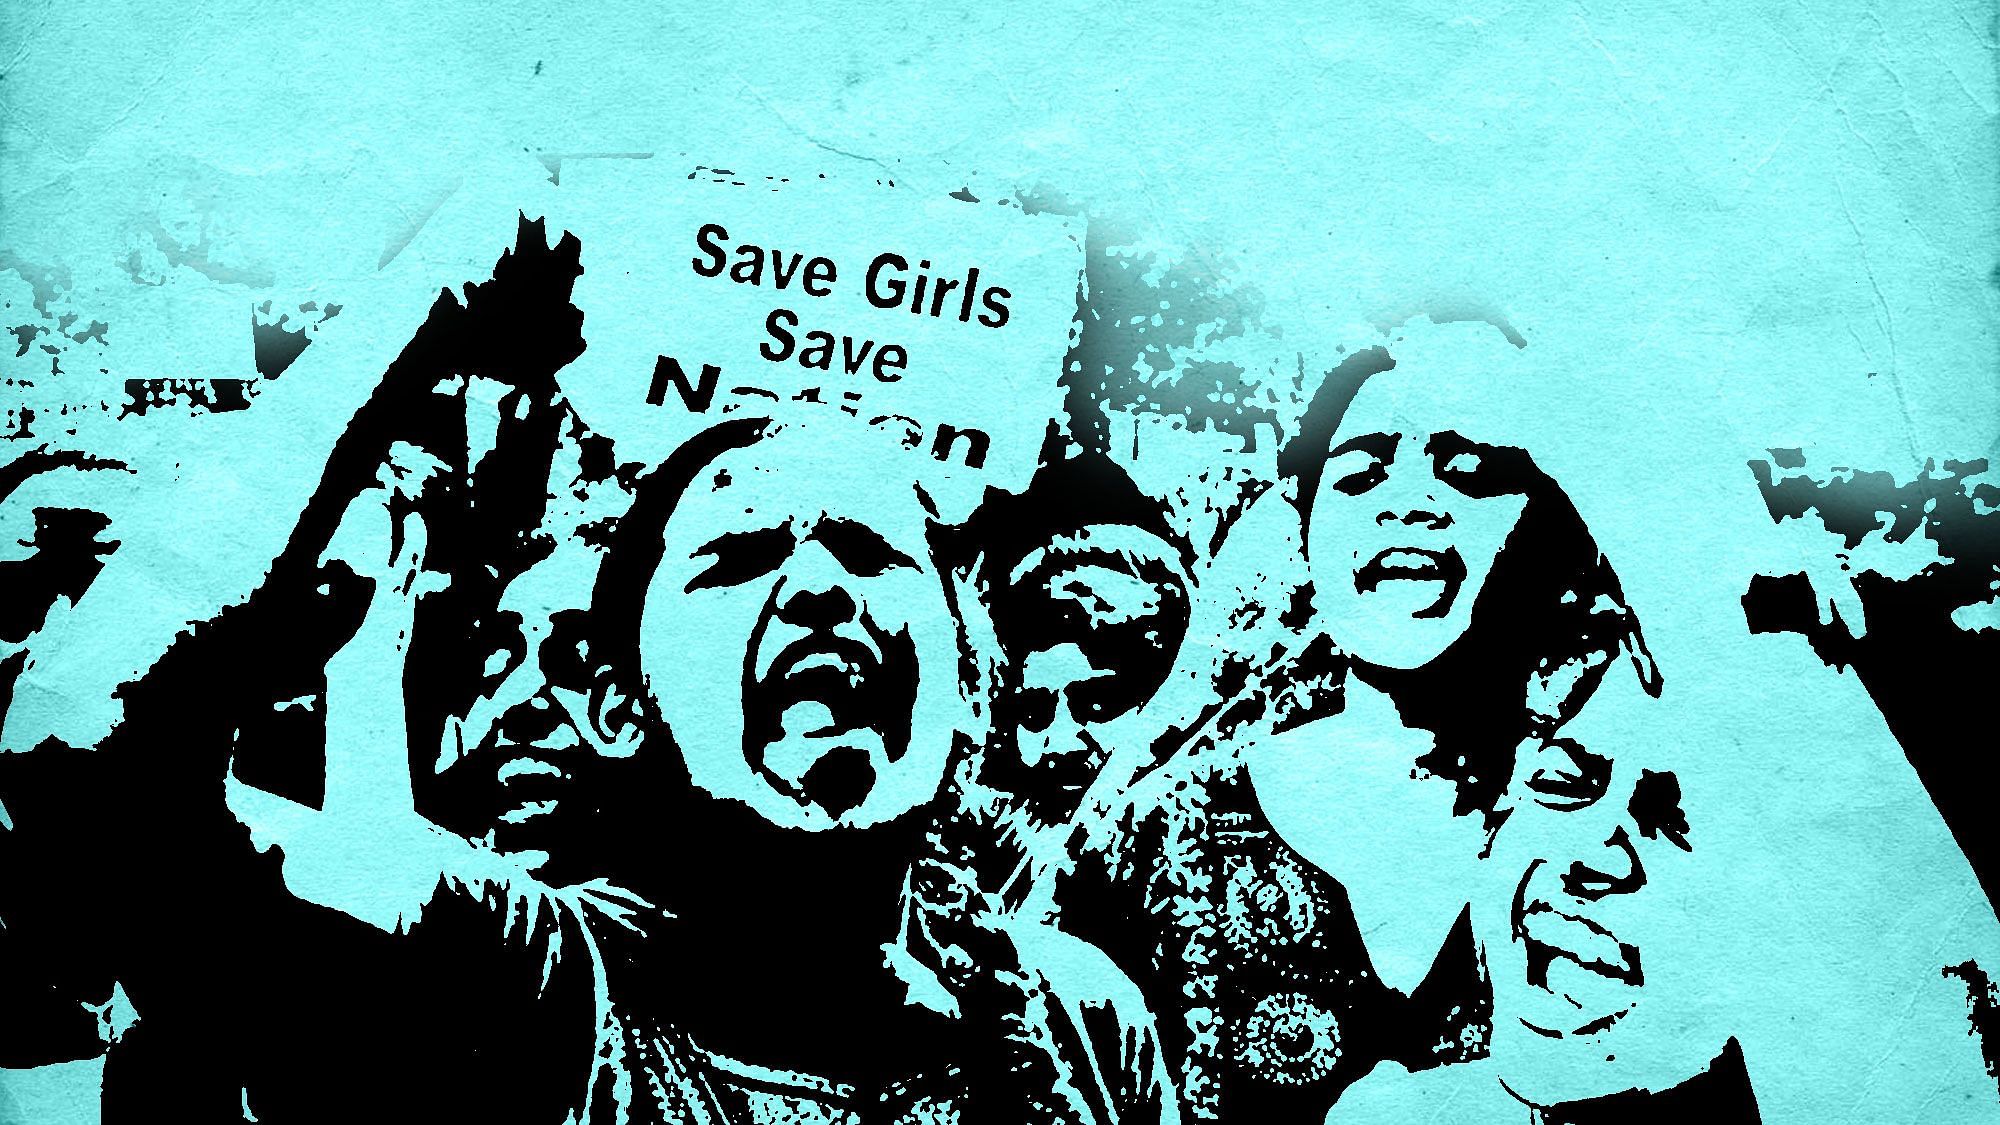 <div class="paragraphs"><p>The National Human Rights Commission (NHRC) and the National Commission for Women (NCW) have served notices to the <a href="https://www.thequint.com/topic/rajasthan">Rajasthan government</a> after media reports that minor girls in certain districts of the state were being <a href="https://www.thequint.com/voices/opinion/sulli-deals-bulli-bai-daughter-writes-about-mother-auctioned">auctioned</a> to settle financial disputes.</p></div>